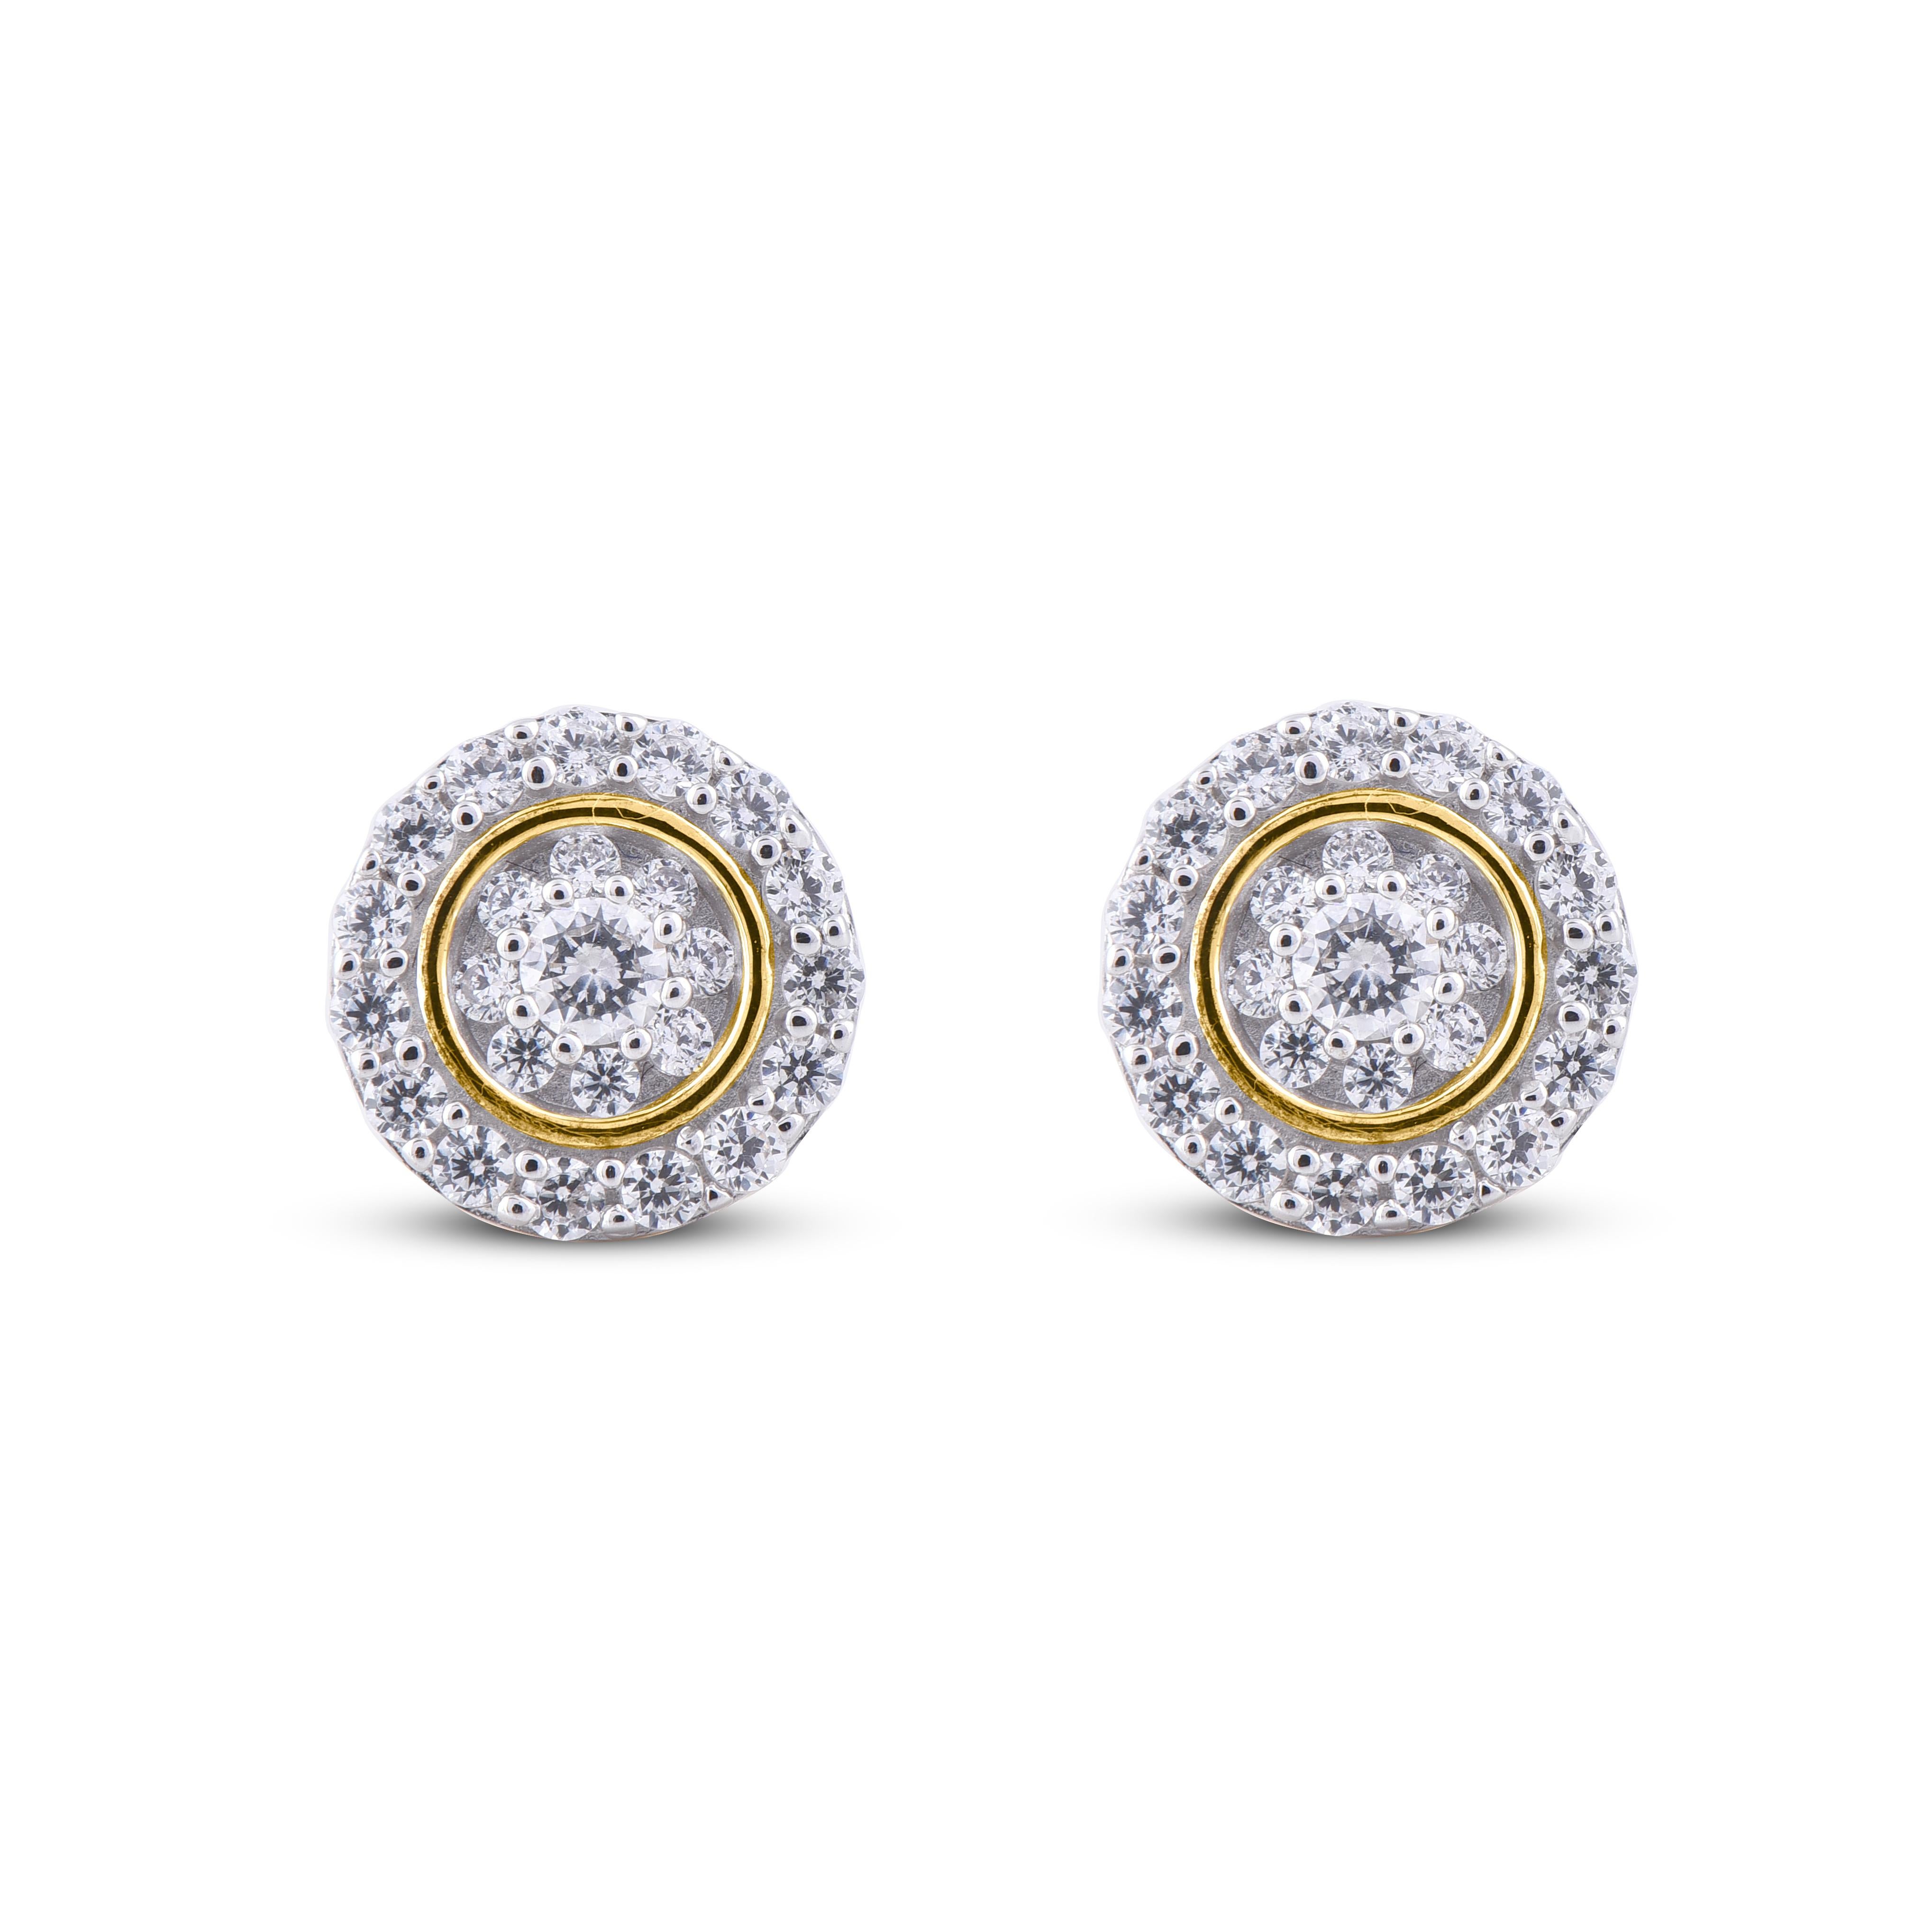 Adorn your casual wear with extra glitz when you put on these earrings. Expertly crafted in 14 Karat Yellow Gold, this earring is cleverly filled with 48 round diamond set in channel and prong setting, shines in H-I color I2 clarity. Captivating